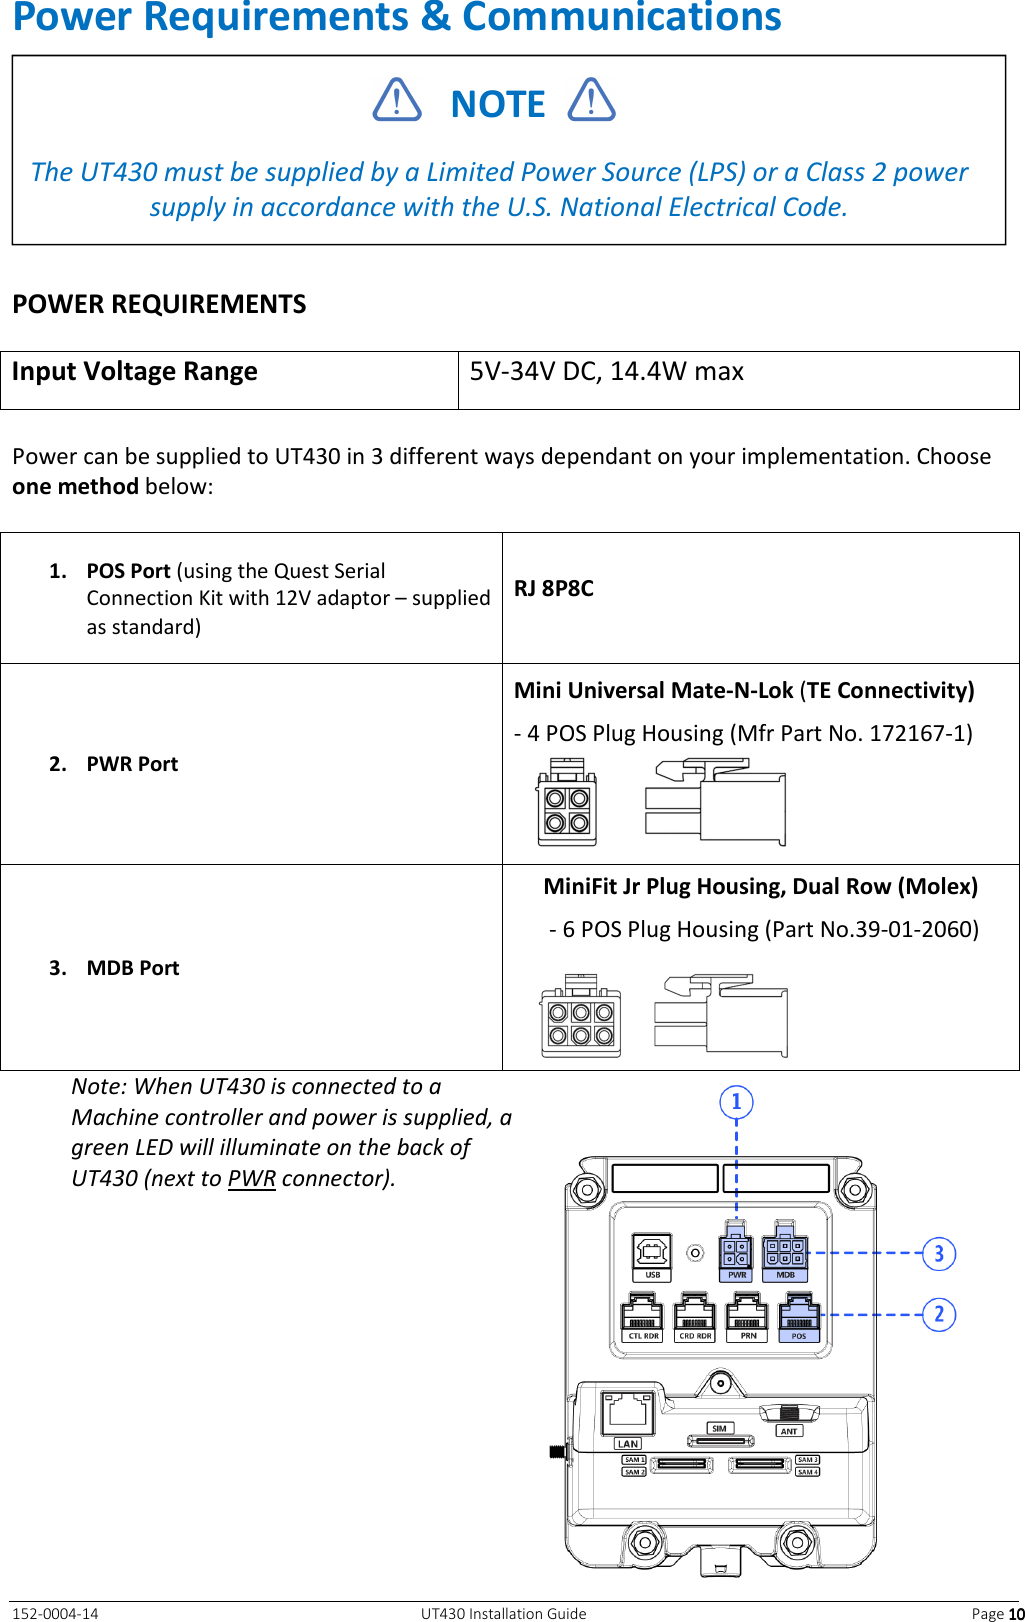   152-0004-14  UT430 Installation Guide  Page 10101010 Power Requirements &amp; Communications   POWER REQUIREMENTS  Input Voltage Range  5V-34V DC, 14.4W max  Power can be supplied to UT430 in 3 different ways dependant on your implementation. Choose one method below:  1. POS Port (using the Quest Serial Connection Kit with 12V adaptor – supplied as standard) RJ 8P8C 2. PWR Port Mini Universal Mate-N-Lok (TE Connectivity) - 4 POS Plug Housing (Mfr Part No. 172167-1)  3. MDB Port MiniFit Jr Plug Housing, Dual Row (Molex)  - 6 POS Plug Housing (Part No.39-01-2060)  Note: When UT430 is connected to a Machine controller and power is supplied, a green LED will illuminate on the back of UT430 (next to PWR connector).       NOTE    The UT430 must be supplied by a Limited Power Source (LPS) or a Class 2 power supply in accordance with the U.S. National Electrical Code.  